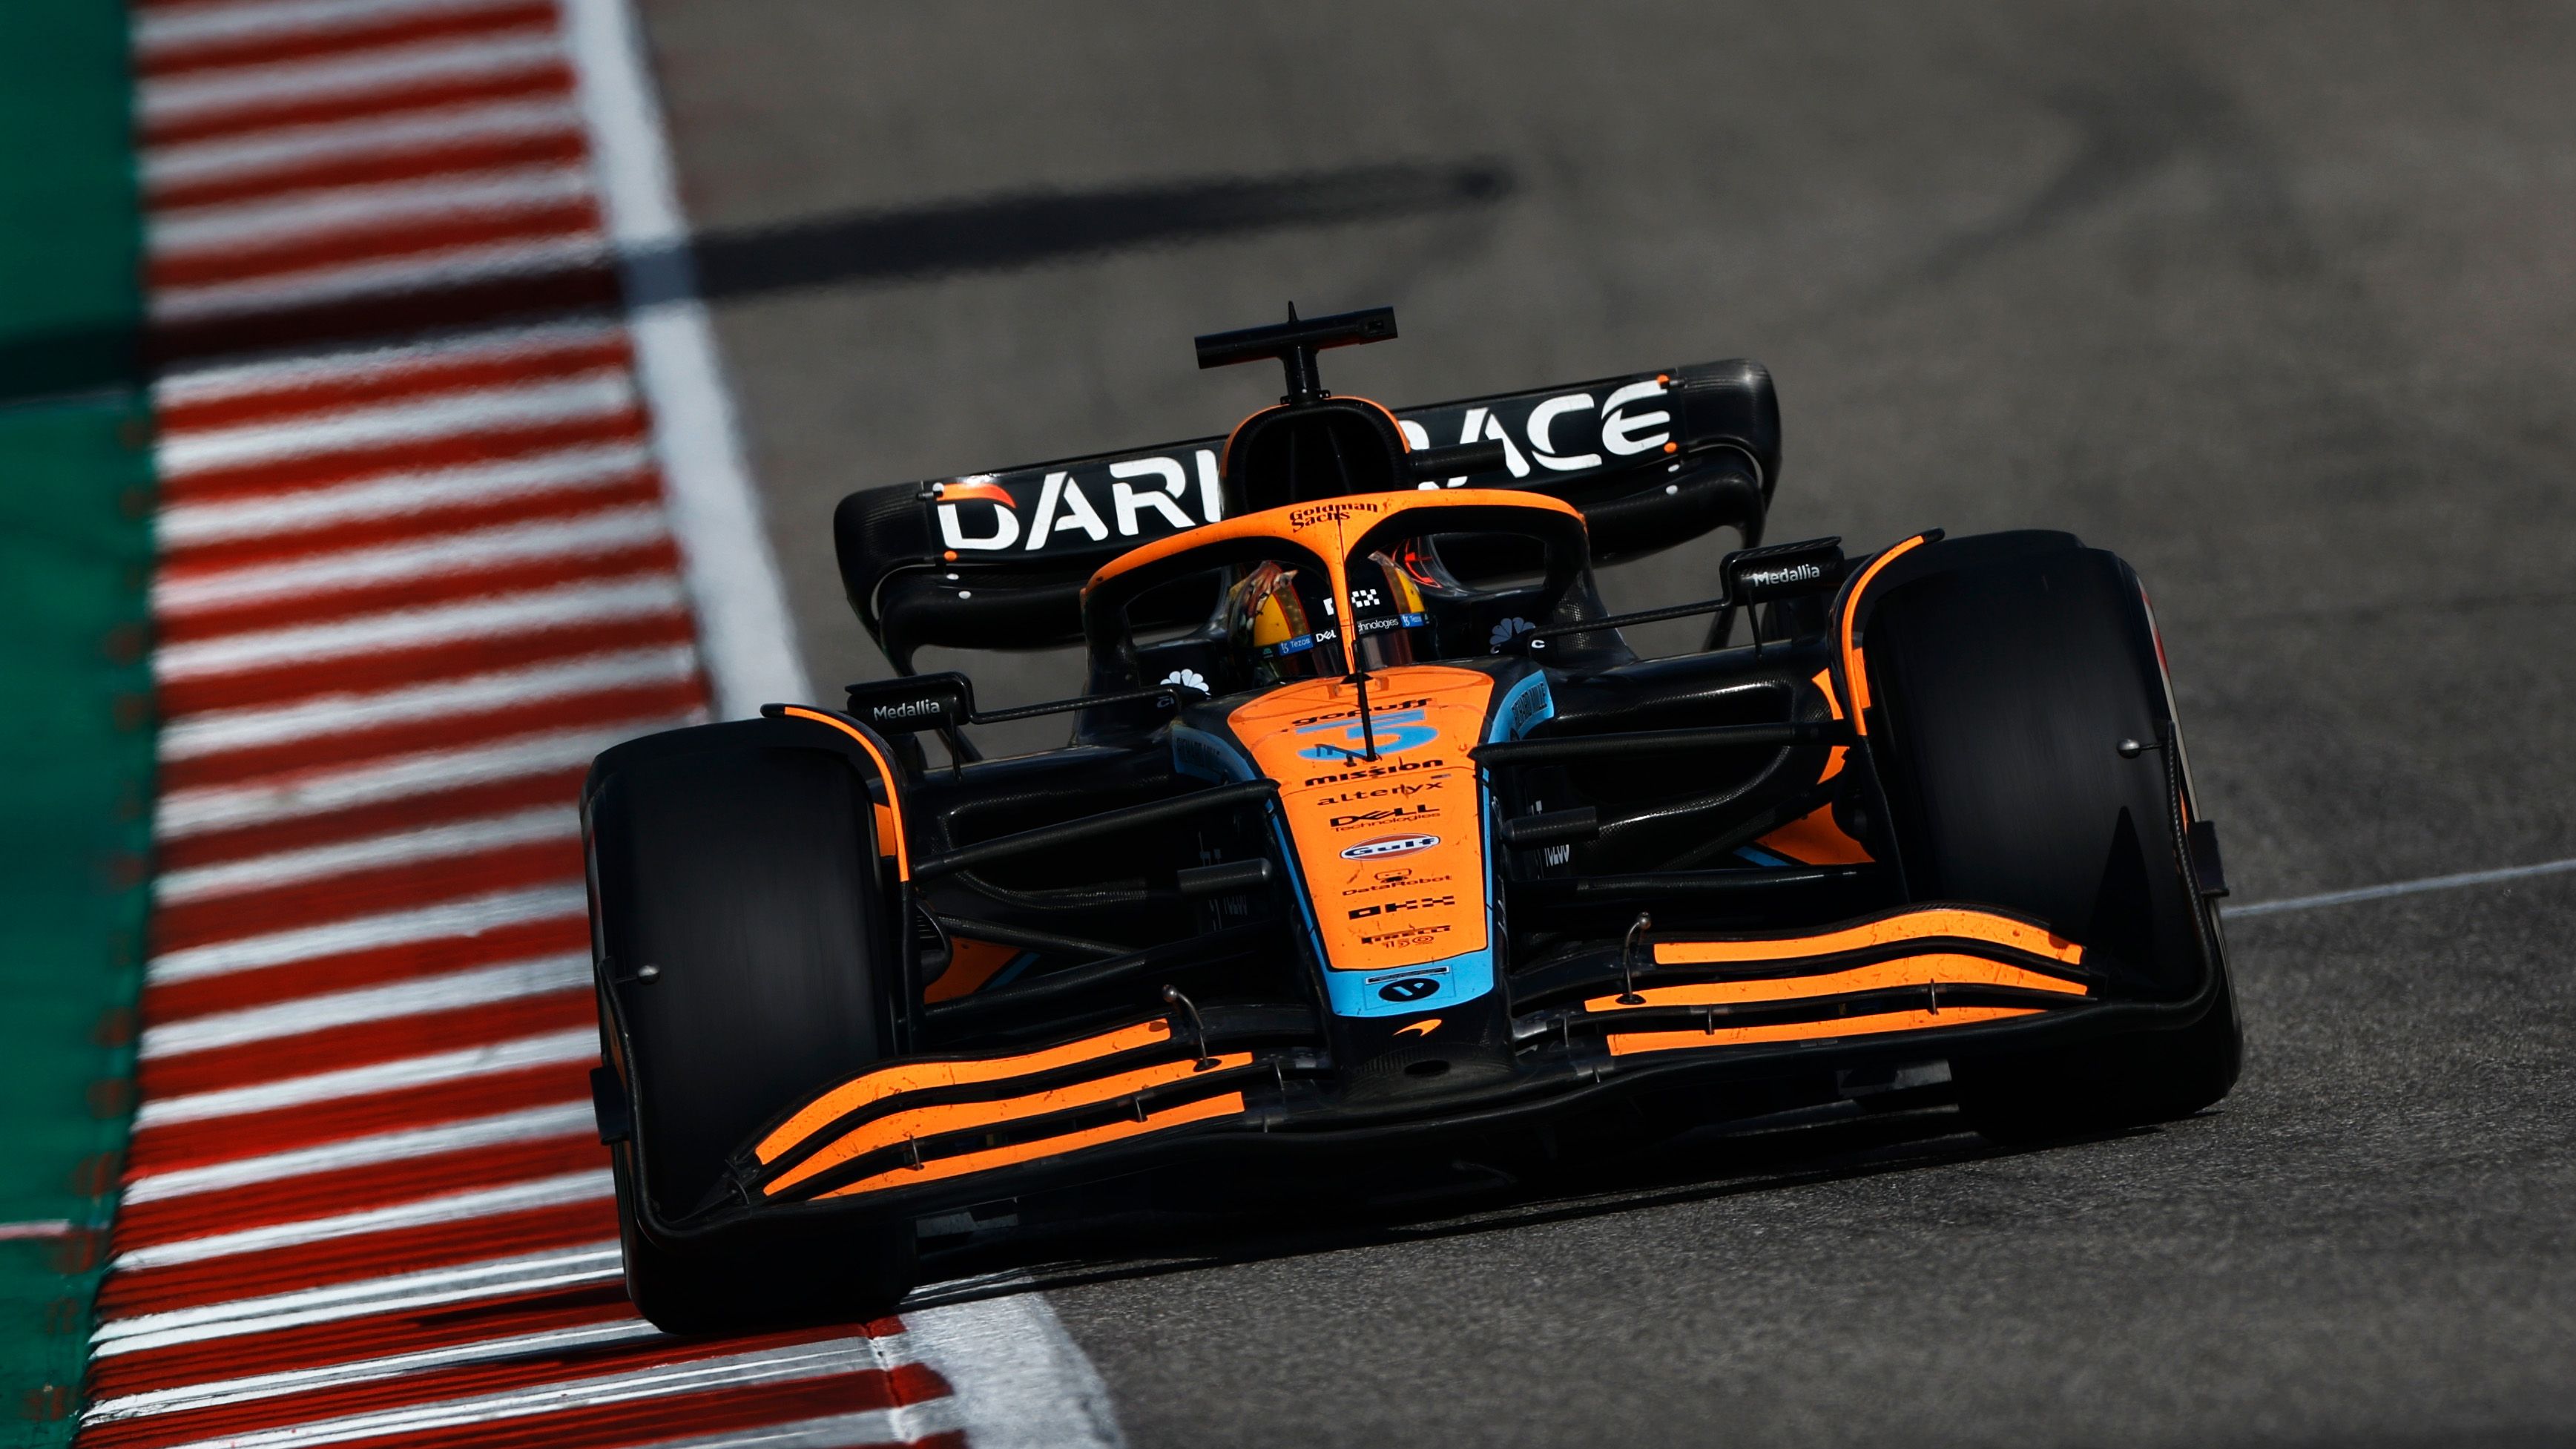 Daniel Ricciardo of Australia driving the (3) McLaren MCL36 Mercedes on track during the F1 Grand Prix of USA at Circuit of The Americas on October 23, 2022 in Austin, Texas. (Photo by Jared C. Tilton/Getty Images)